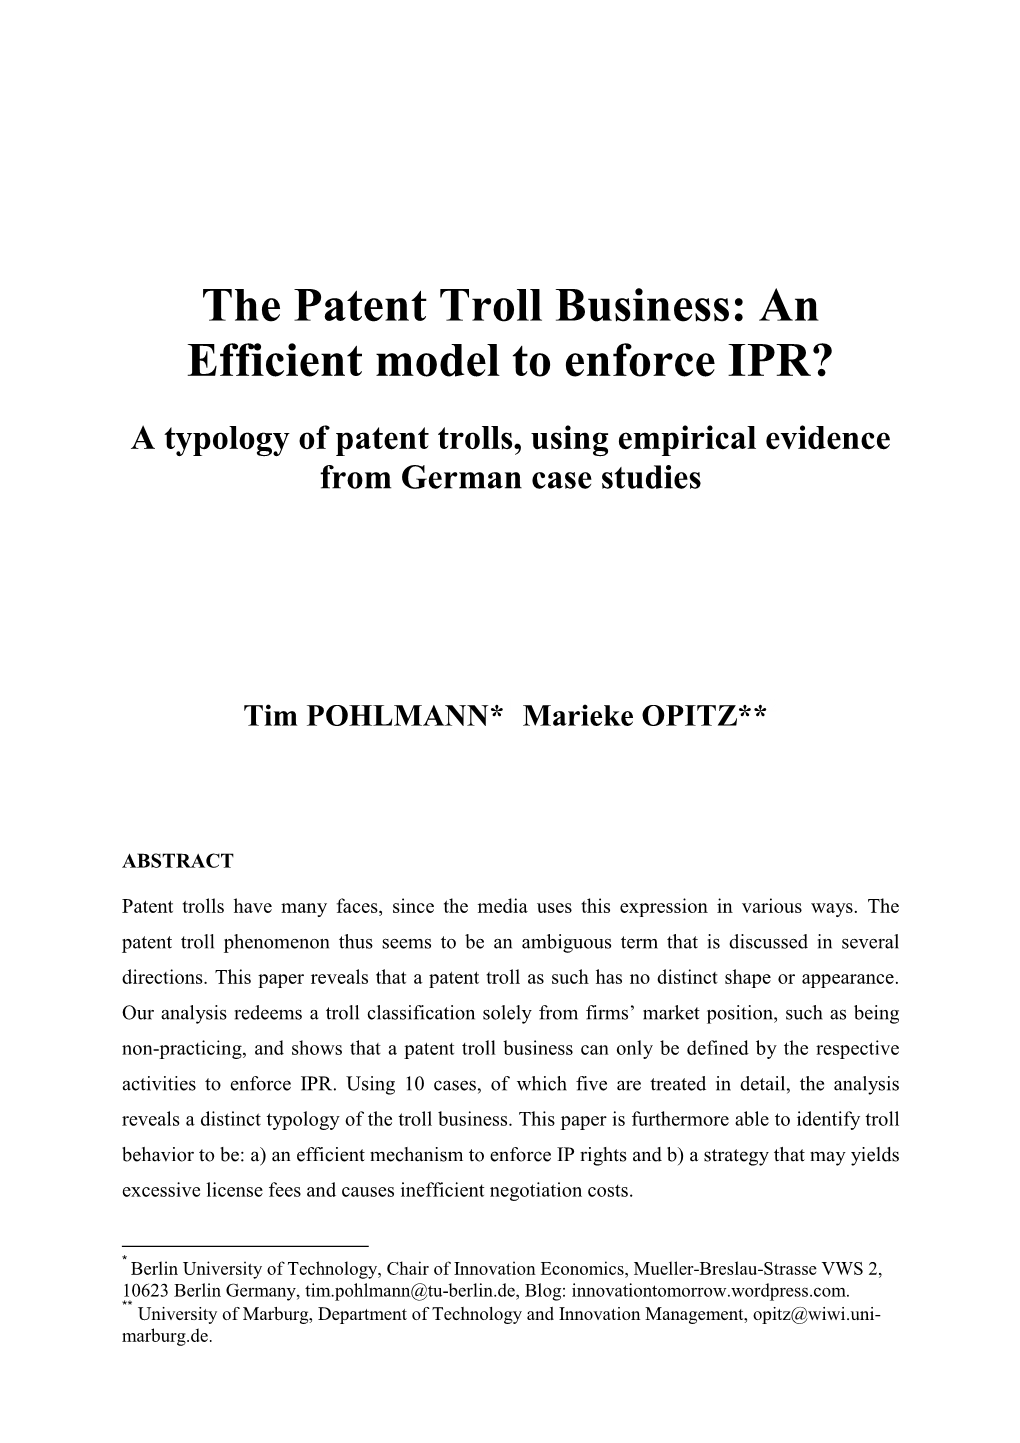 The Patent Troll Business: an Efficient Model to Enforce IPR?